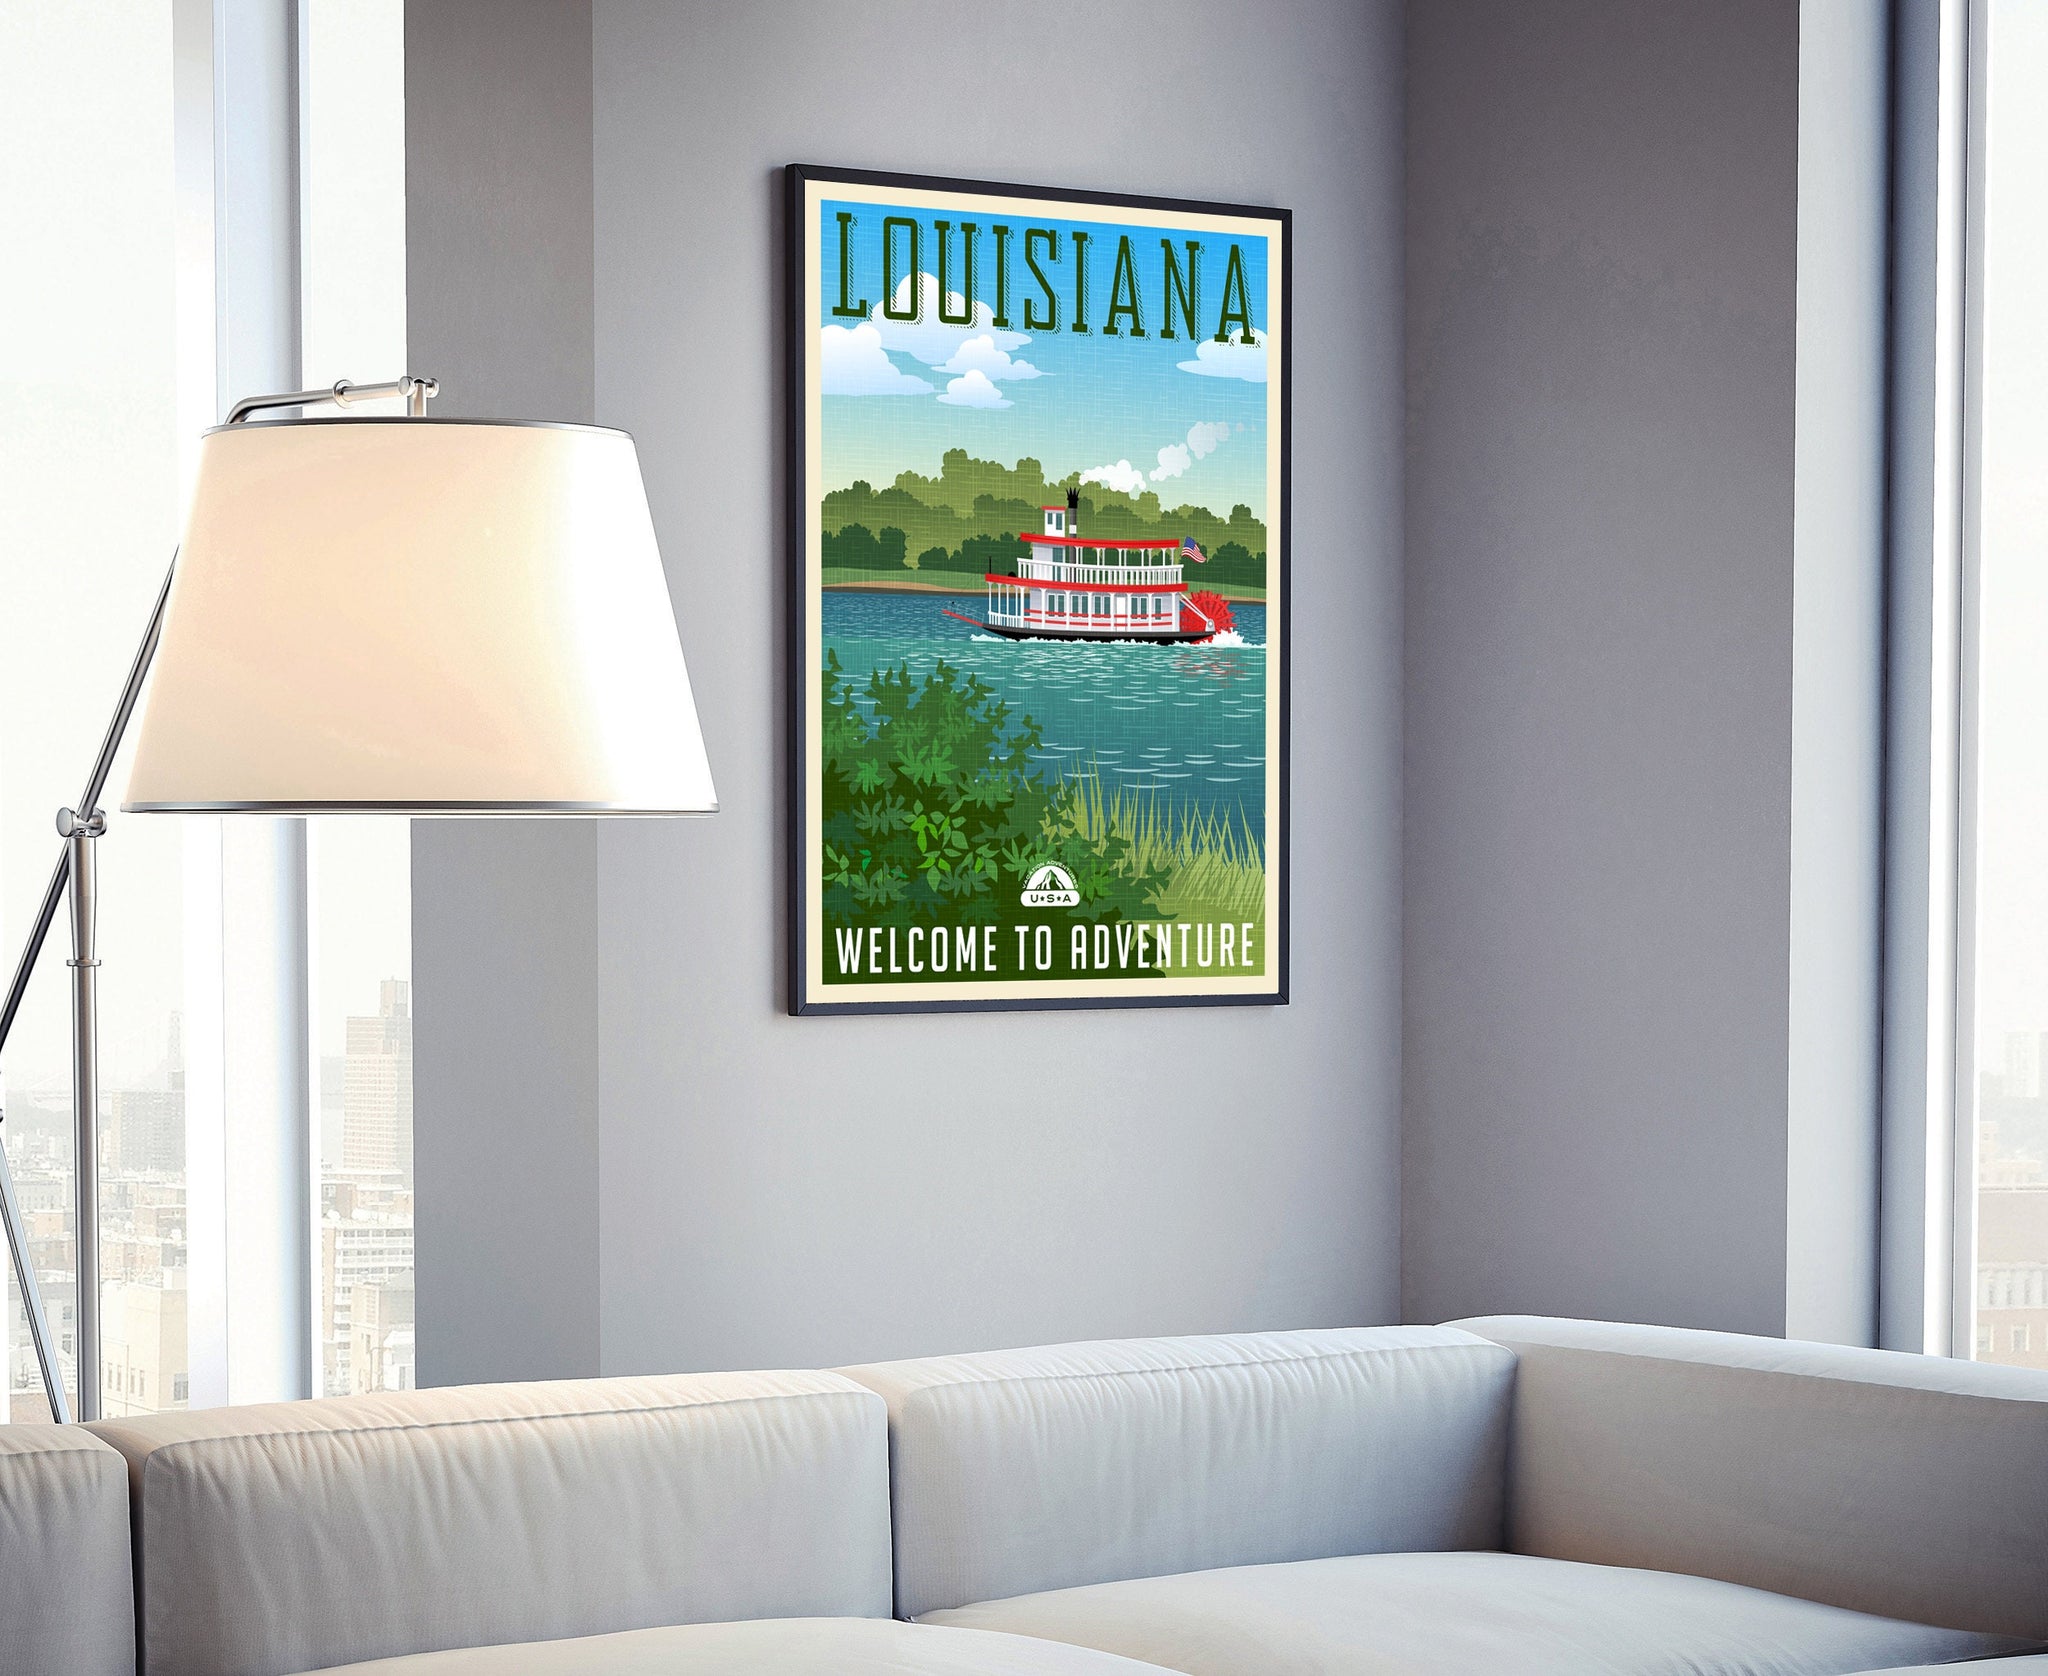 Retro Style Travel Poster, Louisiana Vintage Rustic Poster Print, Home Wall Art, Office Wall Decor, Poster Print, Louisiana State Map Poster